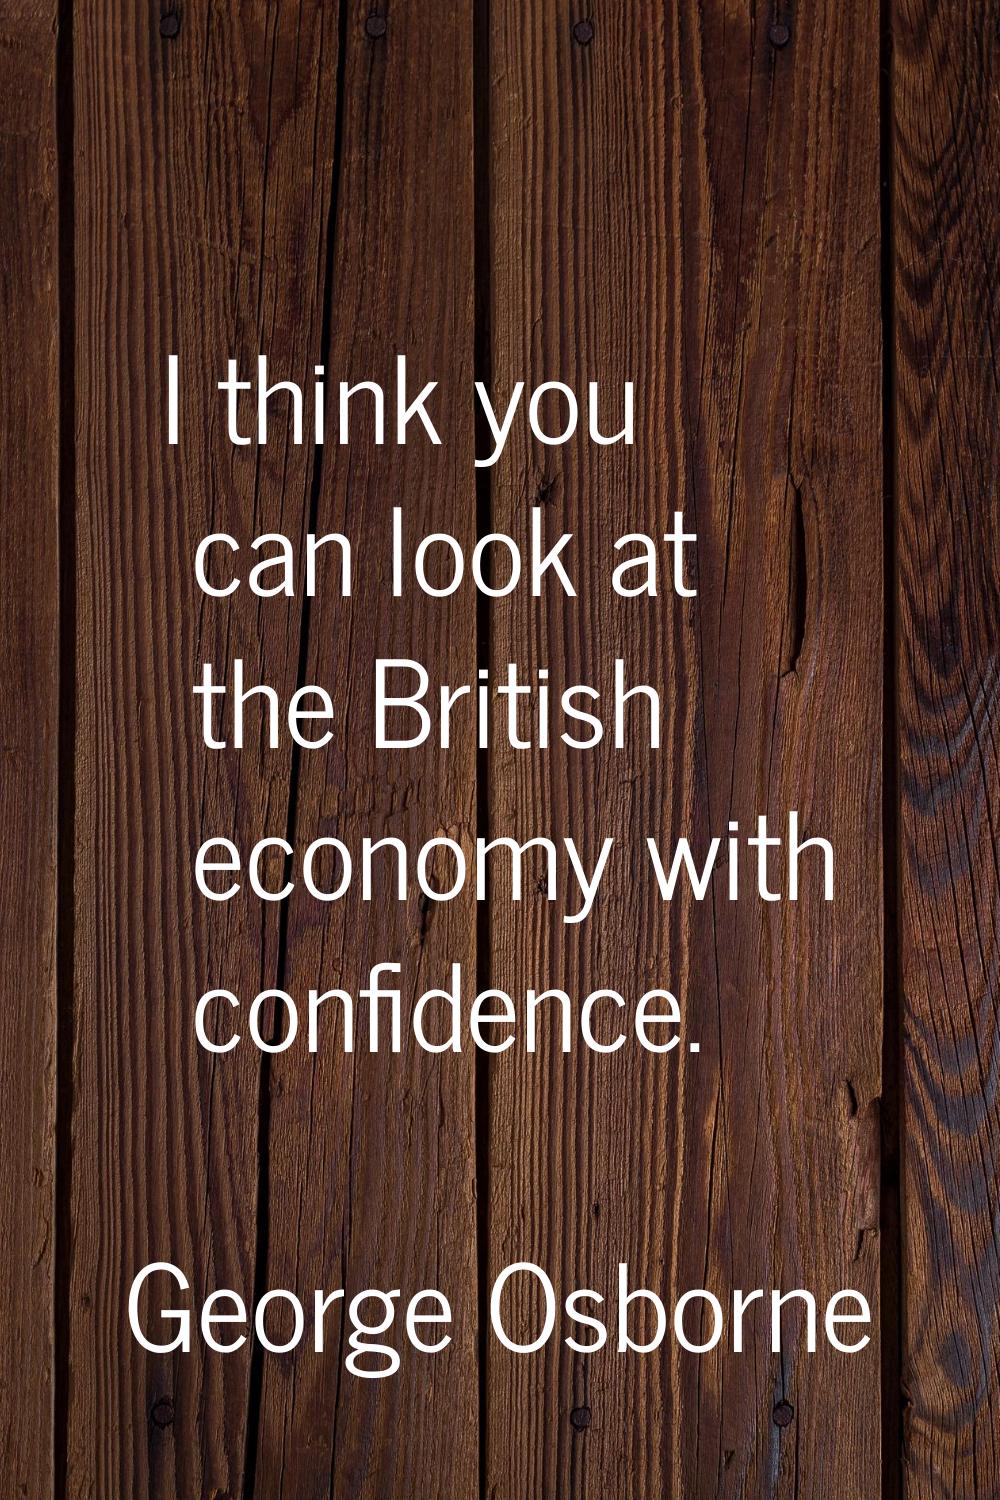 I think you can look at the British economy with confidence.